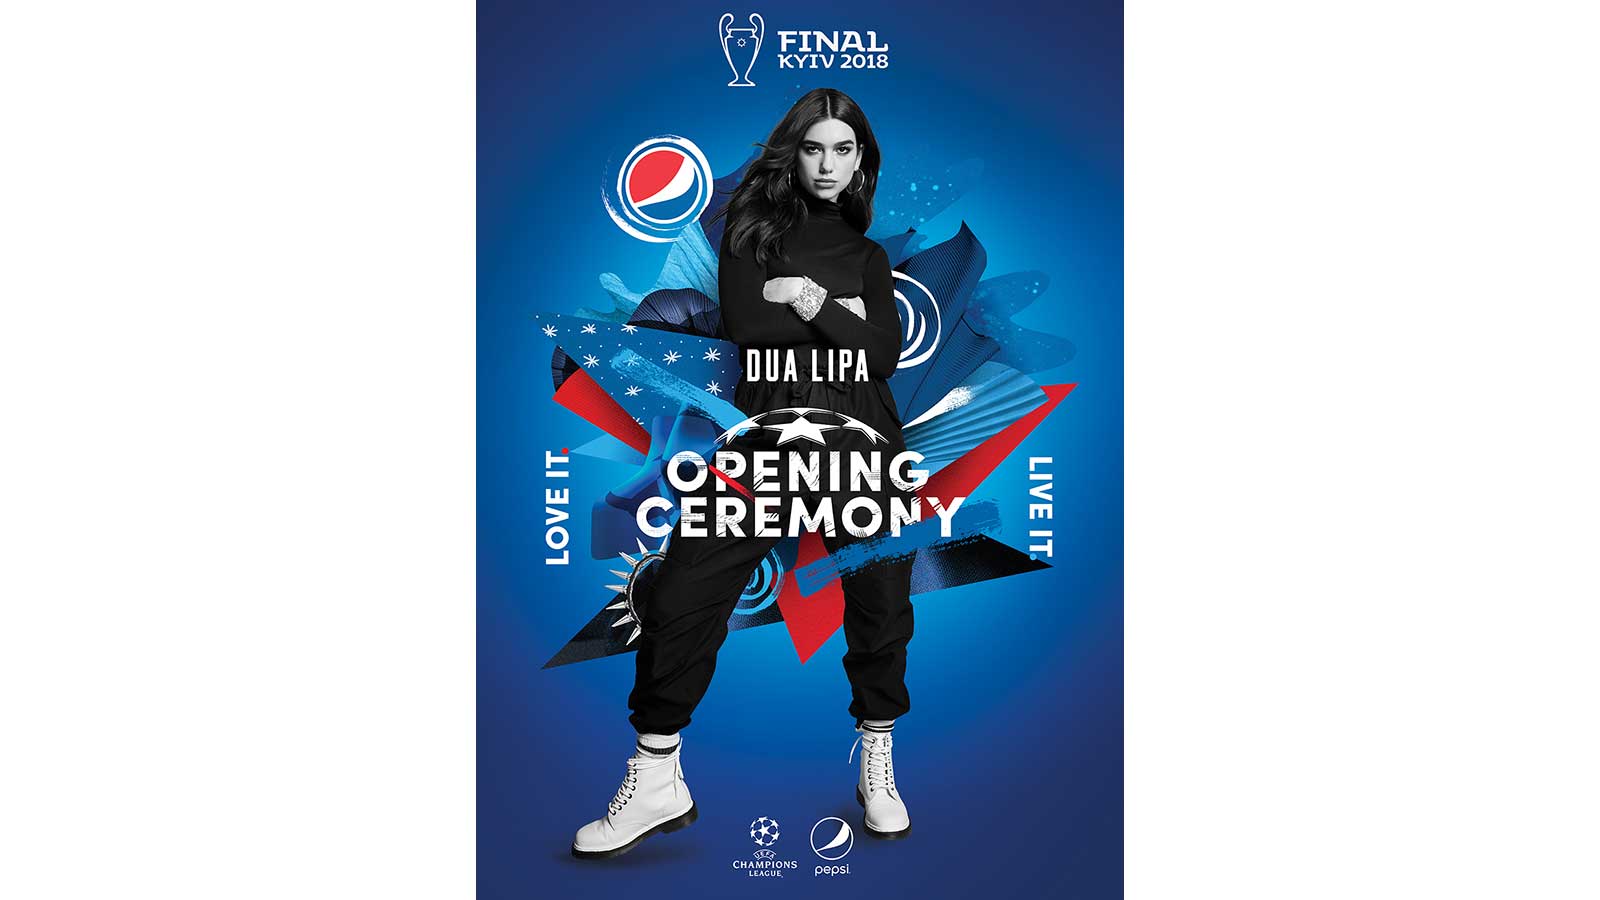 UEFA & Pepsi announce ‘New Rules’ for UEFA Champions League Final Opening Ceremony presented by Peps